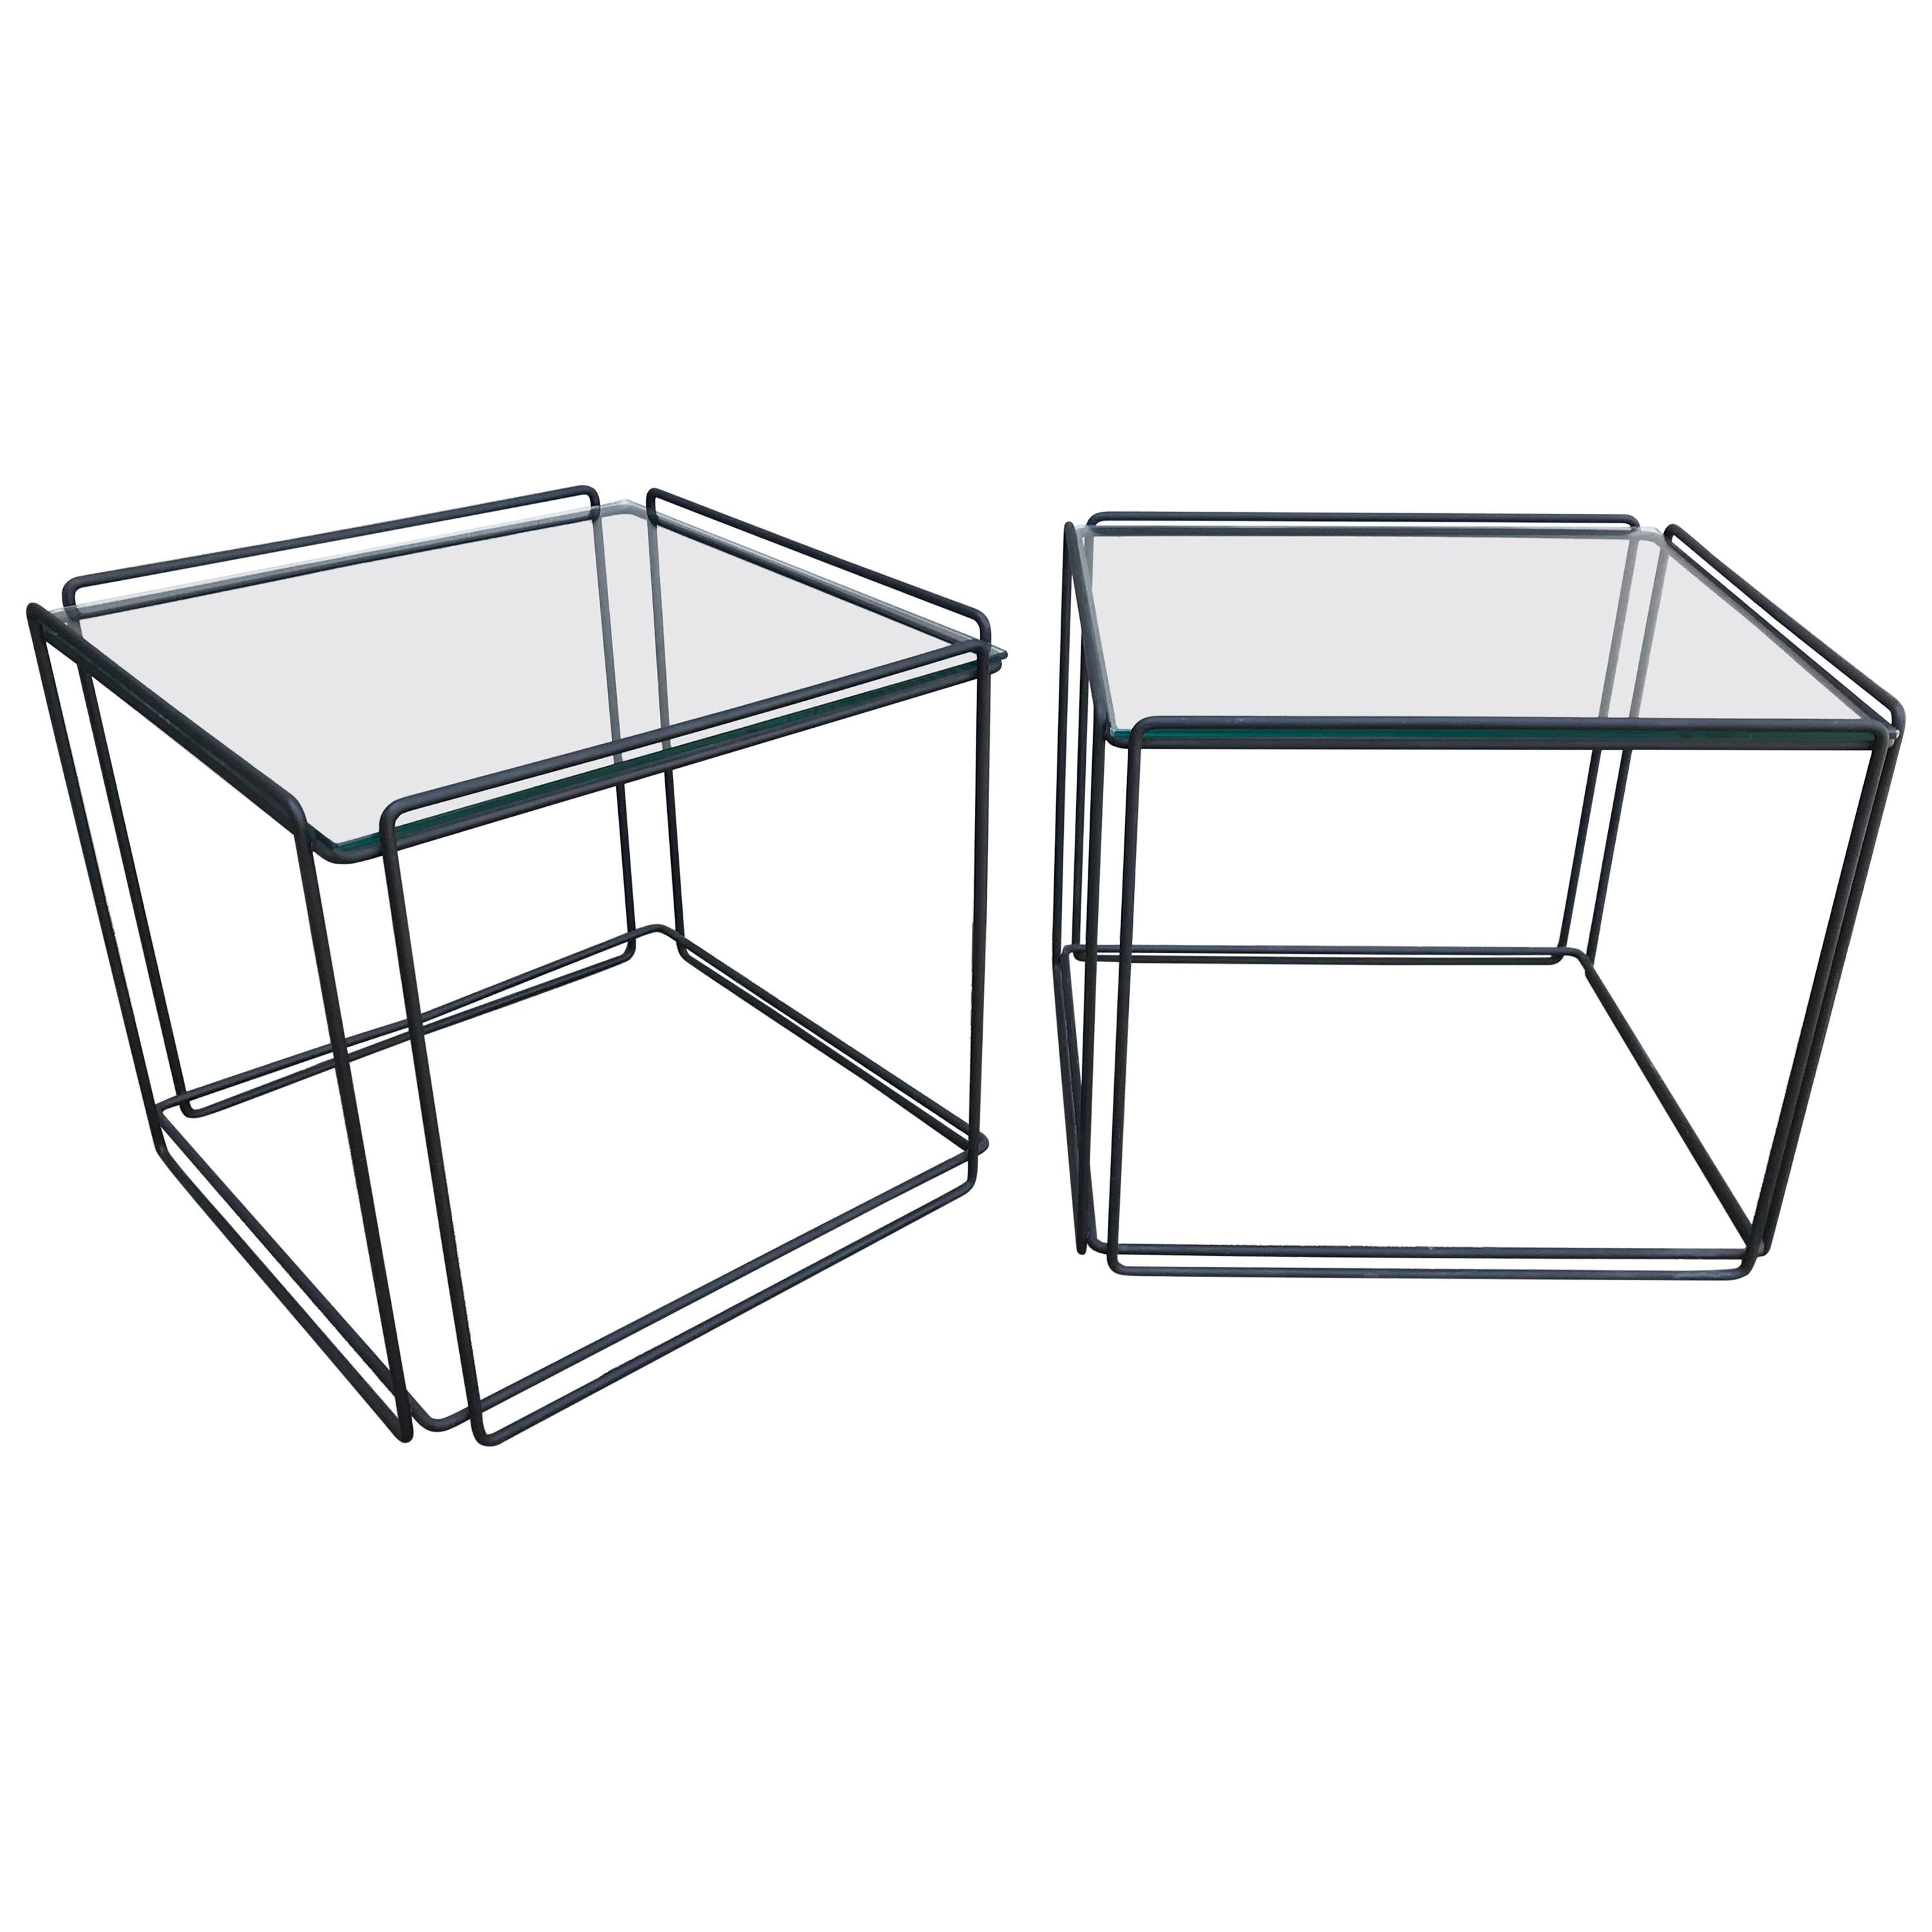 Pair of Mid-Century Modern Metal and Glass Side Tables by Max Sauze, 1970s